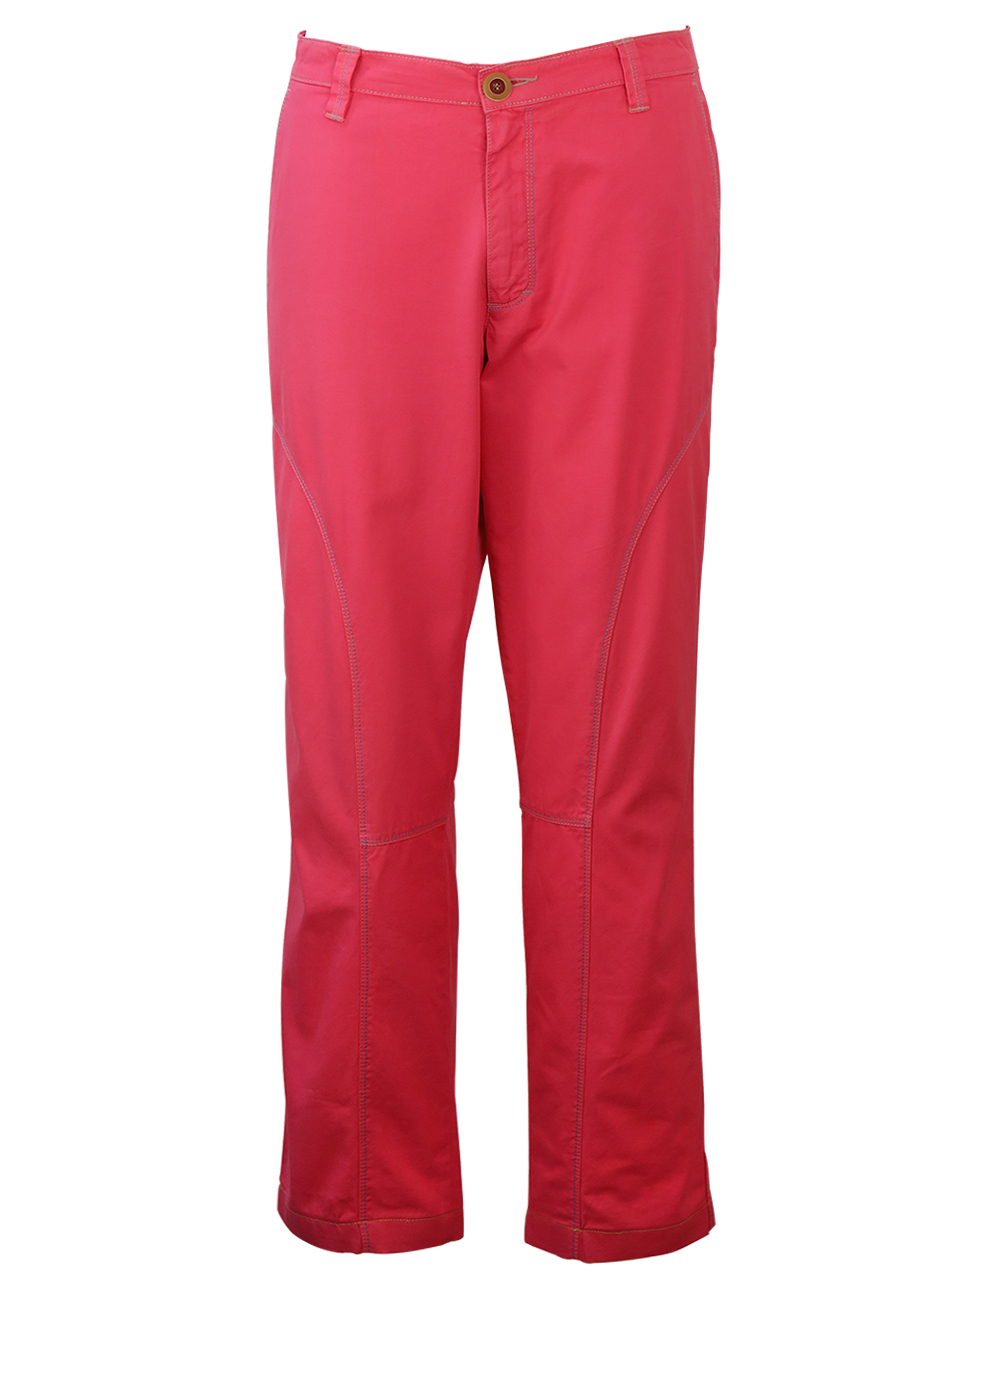 Pink Slacks and Chinos Full-length trousers Altea Cotton Trouser in Salmon Pink Womens Clothing Trousers 